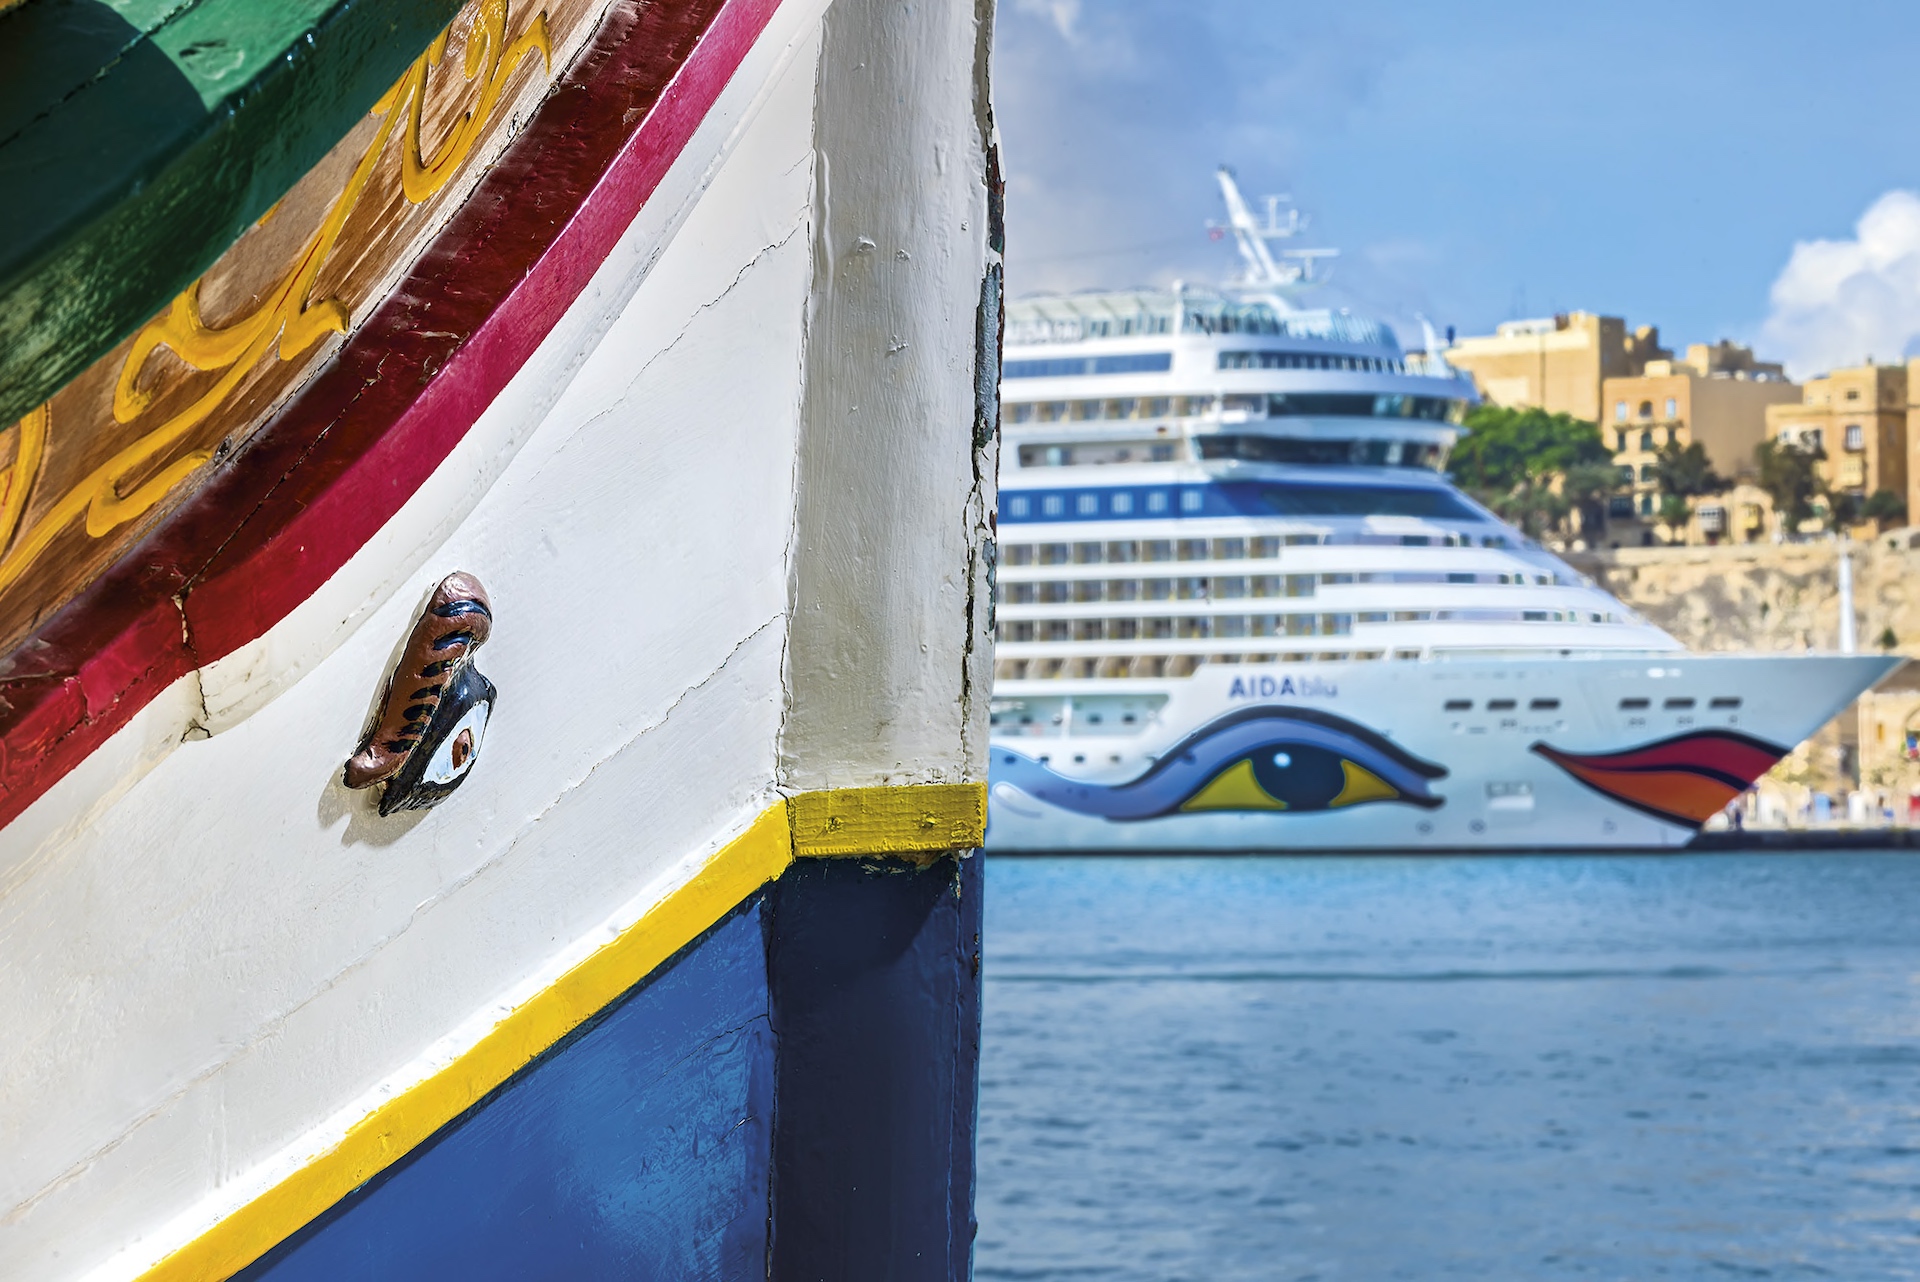 A traditionnal Maltese luzzu sporting the eye of osiris, with a cruise liner in the background